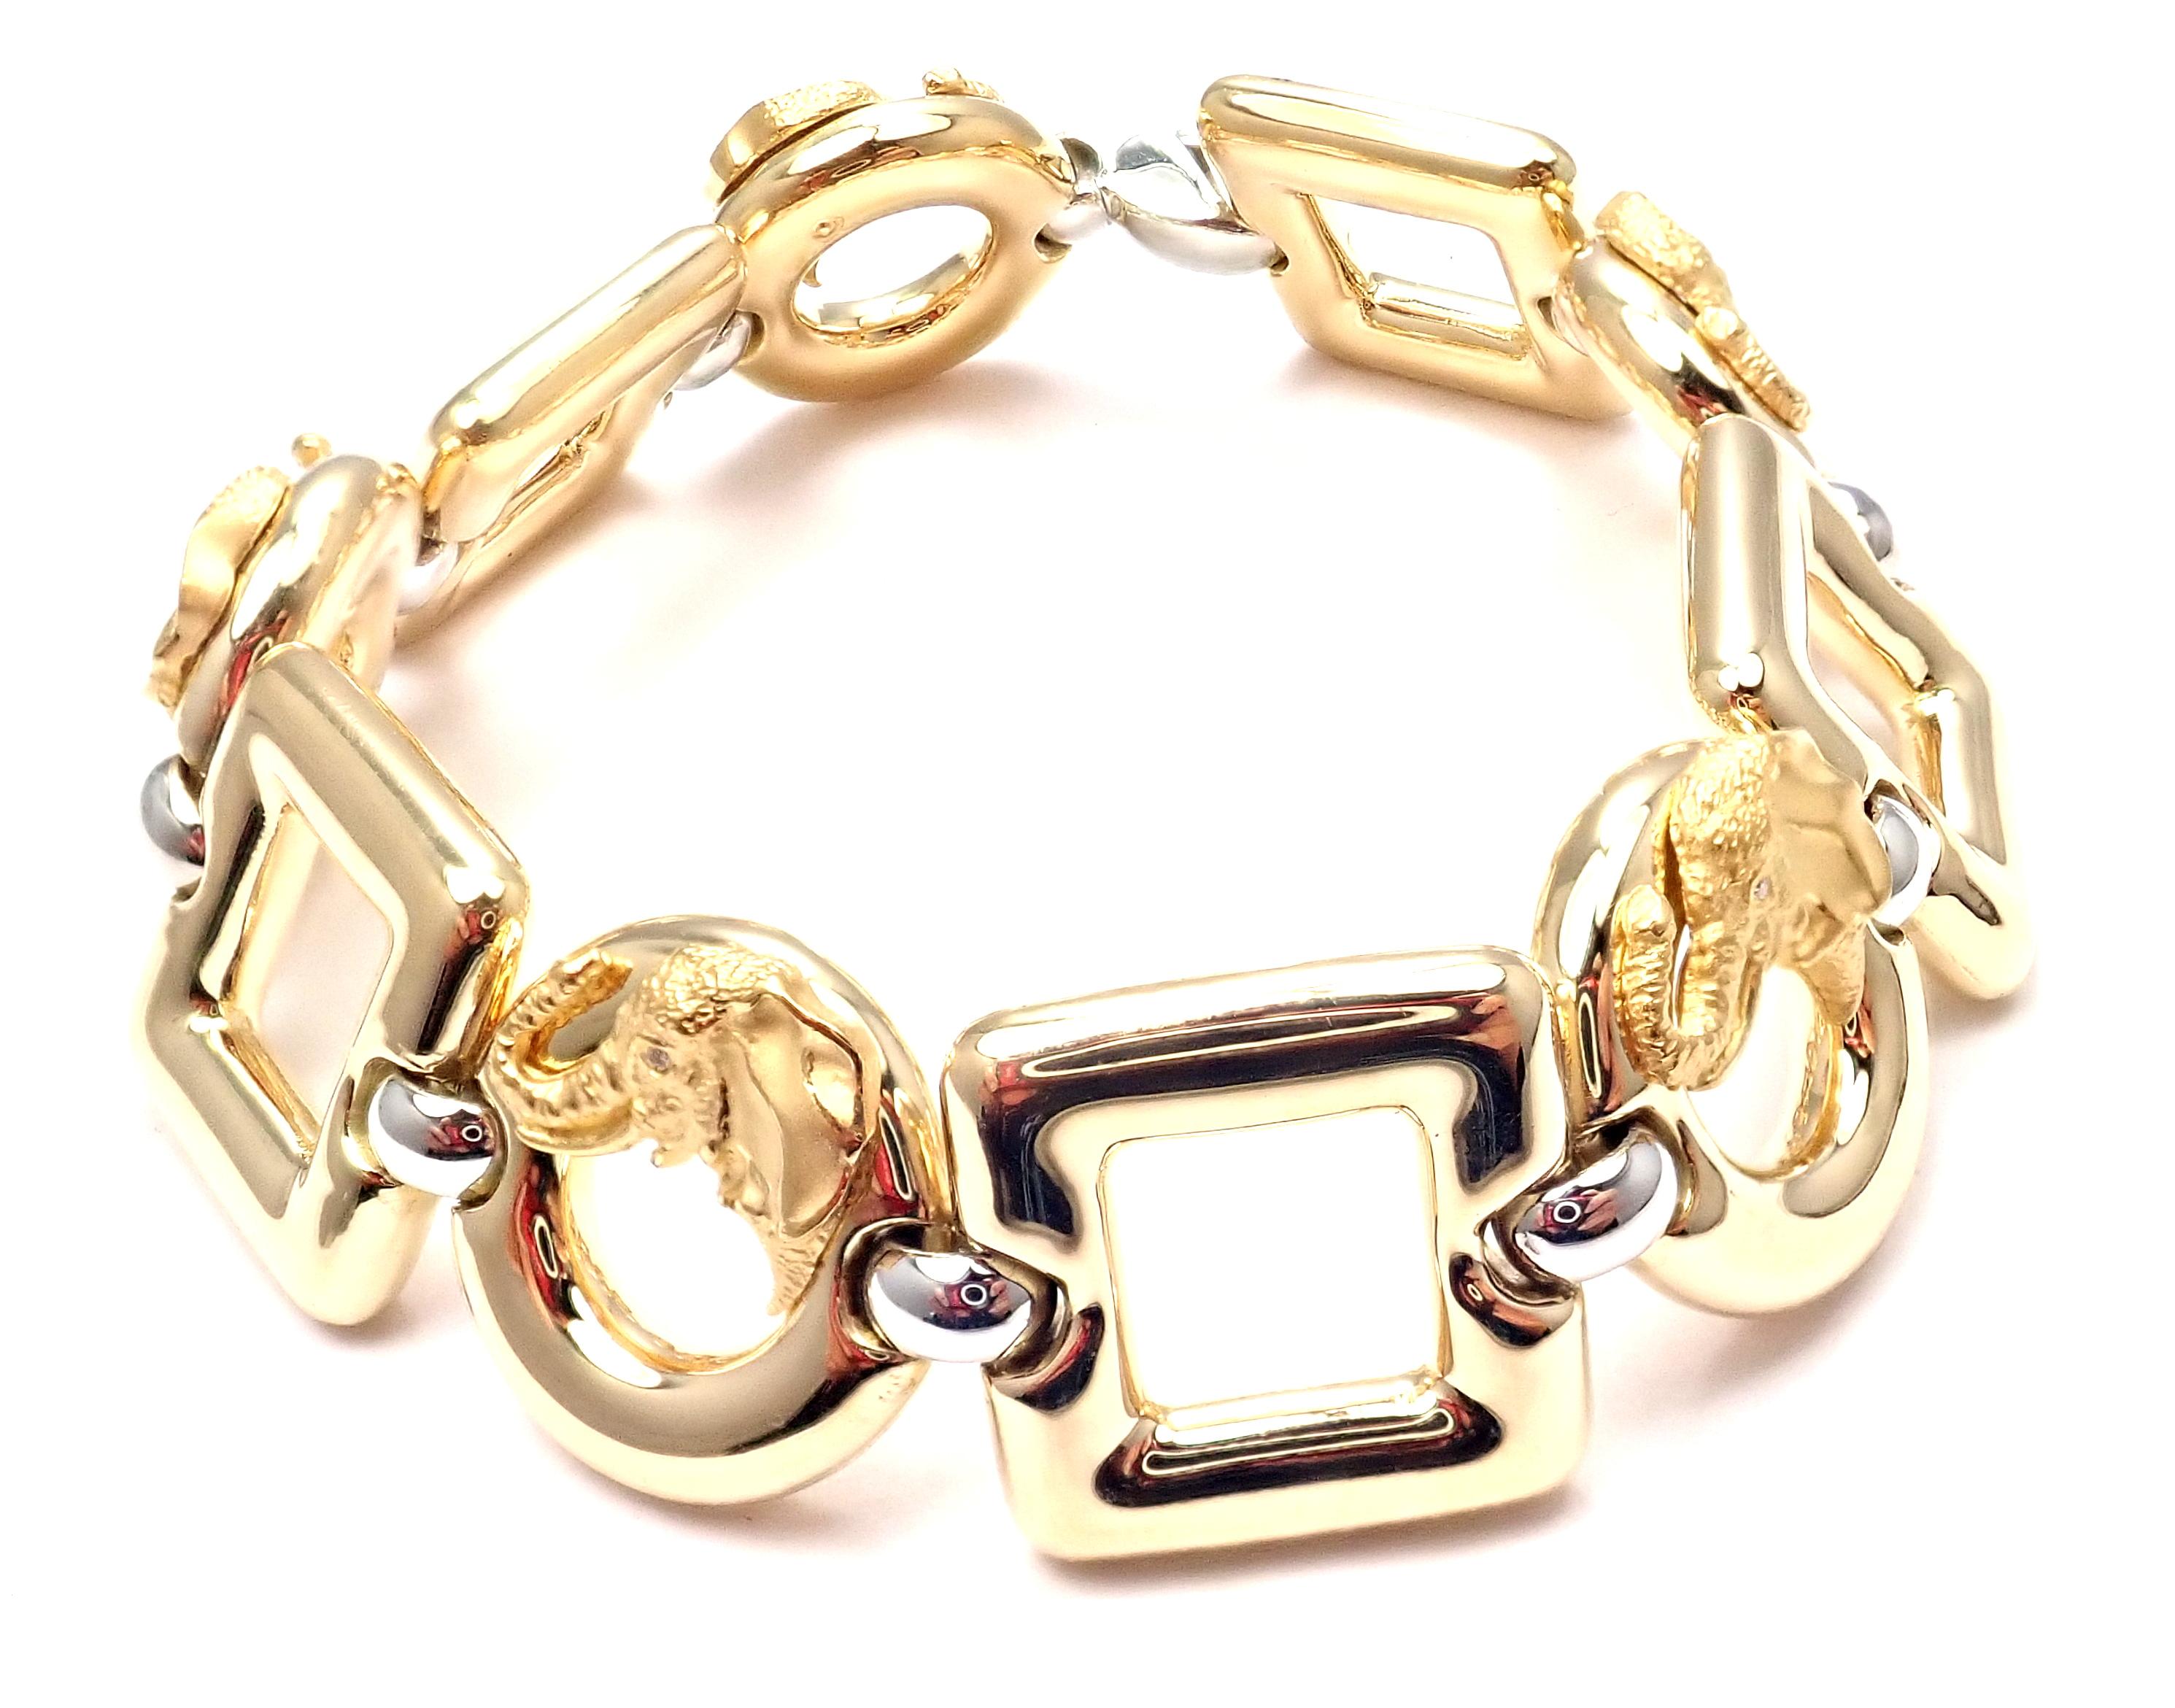 18k Yellow And White Gold Diamond Elephant  Link Bracelet by Carrera Y Carrera.
With 5 small diamonds in the elephant eyes total weight approximately .05ct
Details: 
Length: 7 3/4